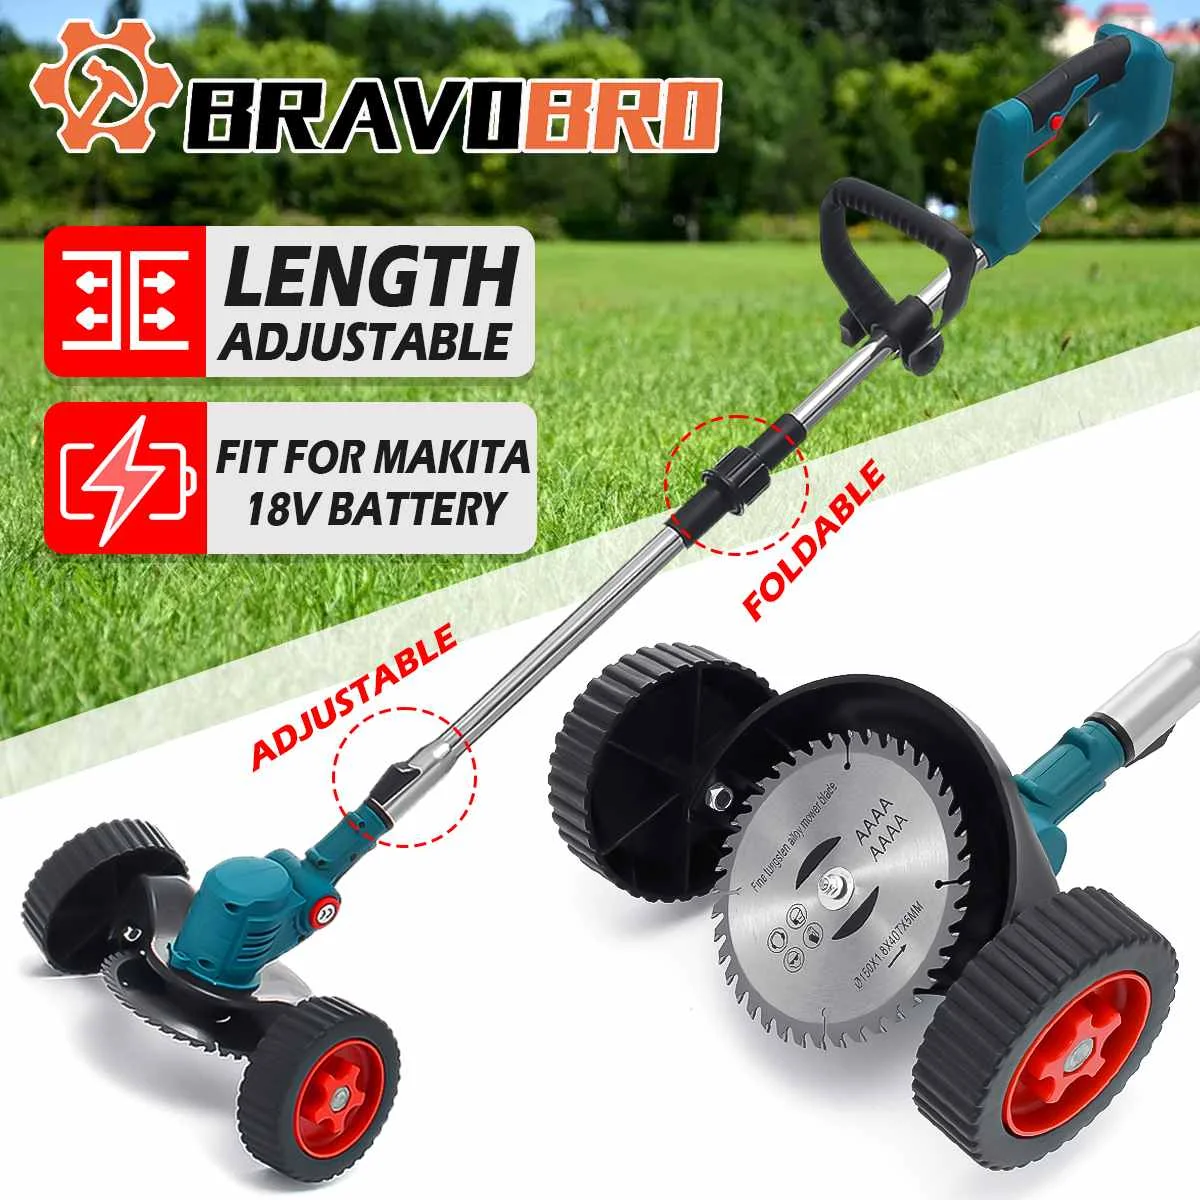 450W 12000RPM Electric Lawn Mower Cordless Grass Trimmer Length Adjustable Cutter Household Garden Tools For Makita 18V Battery